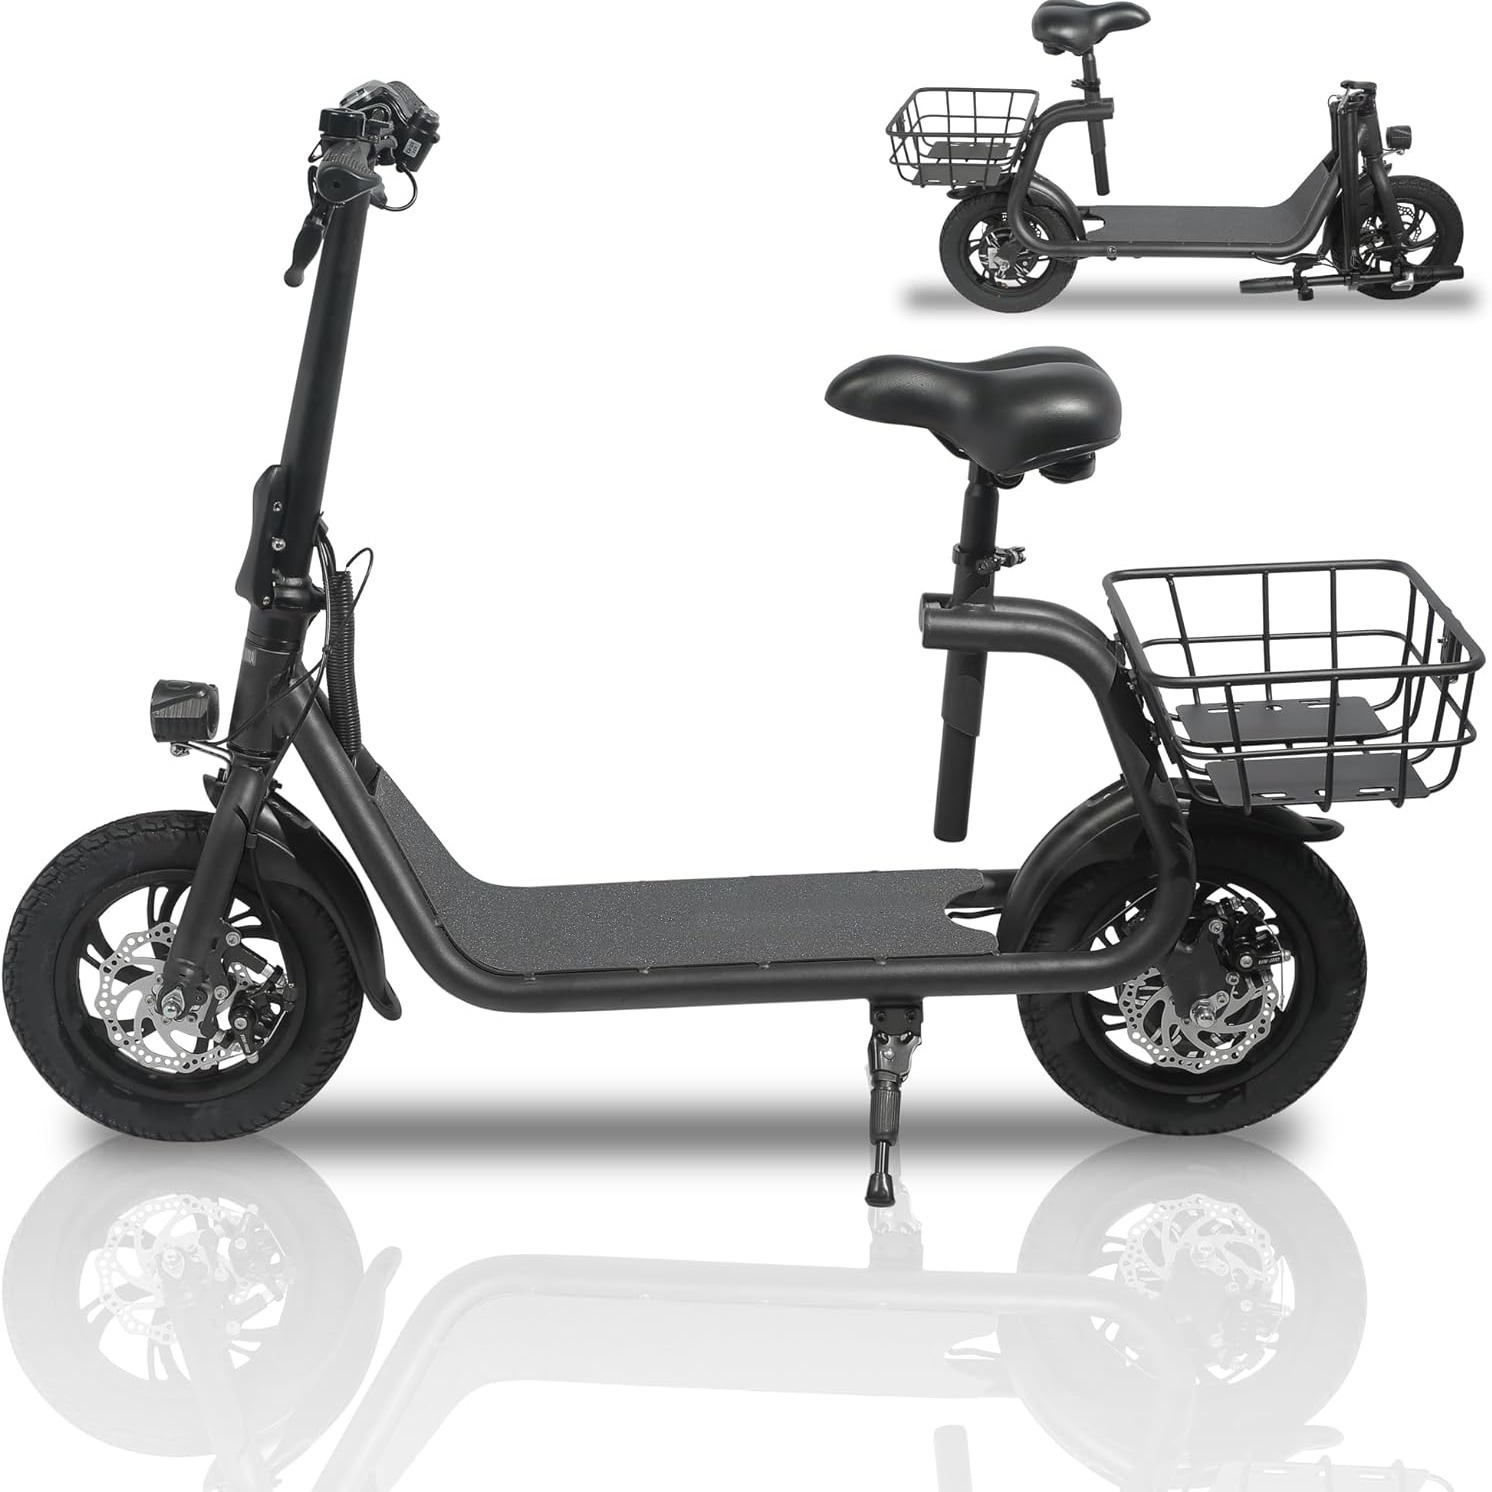 

R1 Electric Scooter For Adults Scooter With Seat For Adult Foldable Electric Mopeds With 450w Brushless Motor Commuter 265lbs Max Load